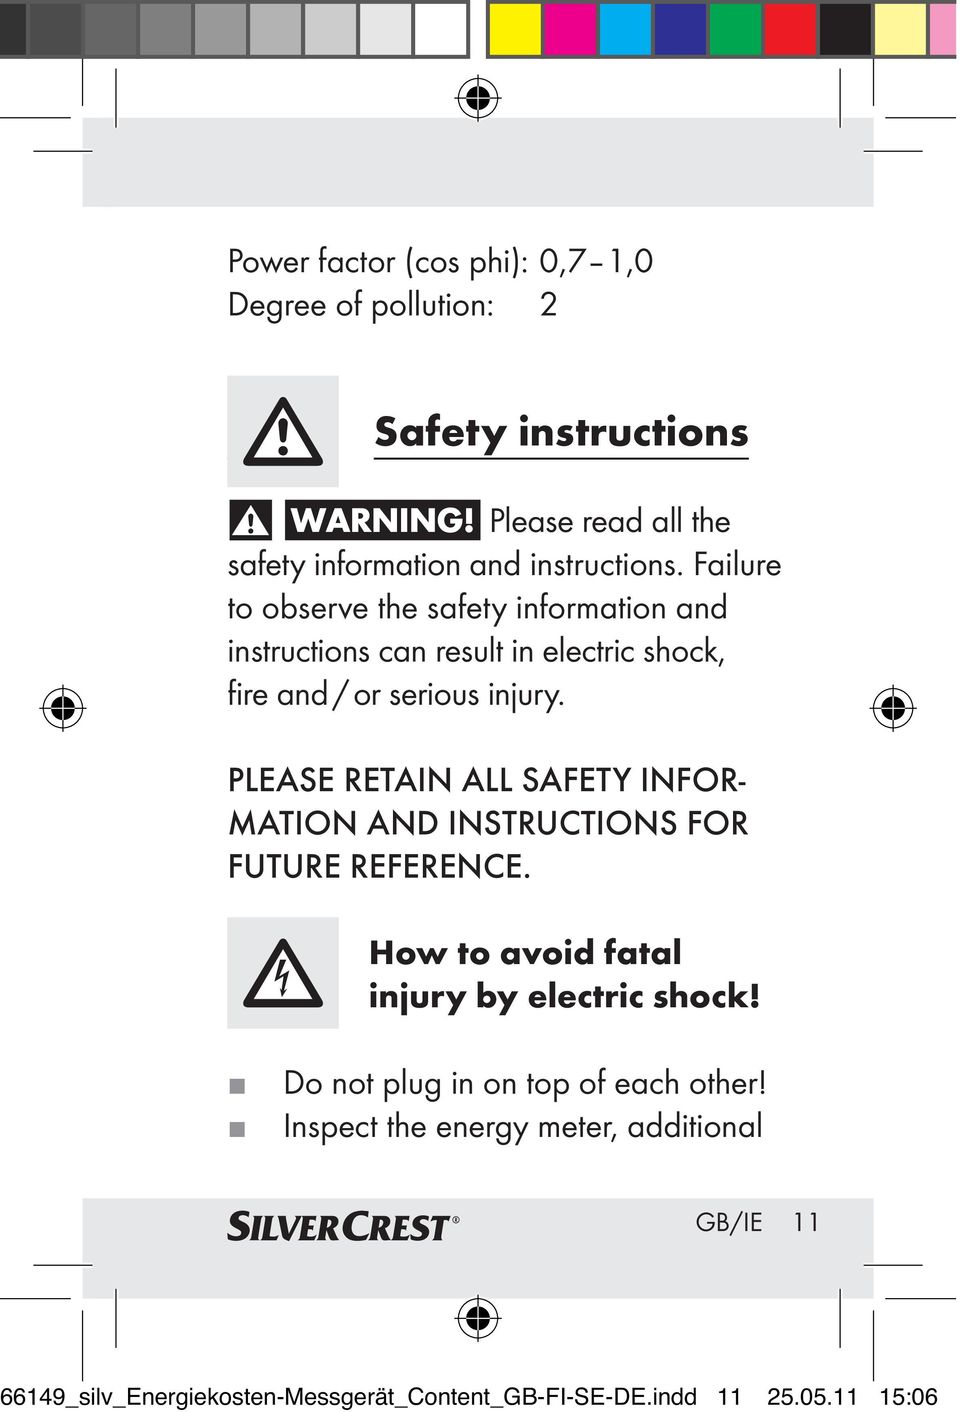 PLEASE RETAIN ALL SAFETY INFOR- MATION AND INSTRUCTIONS FOR FUTURE REFERENCE. How to avoid fatal injury by electric shock!